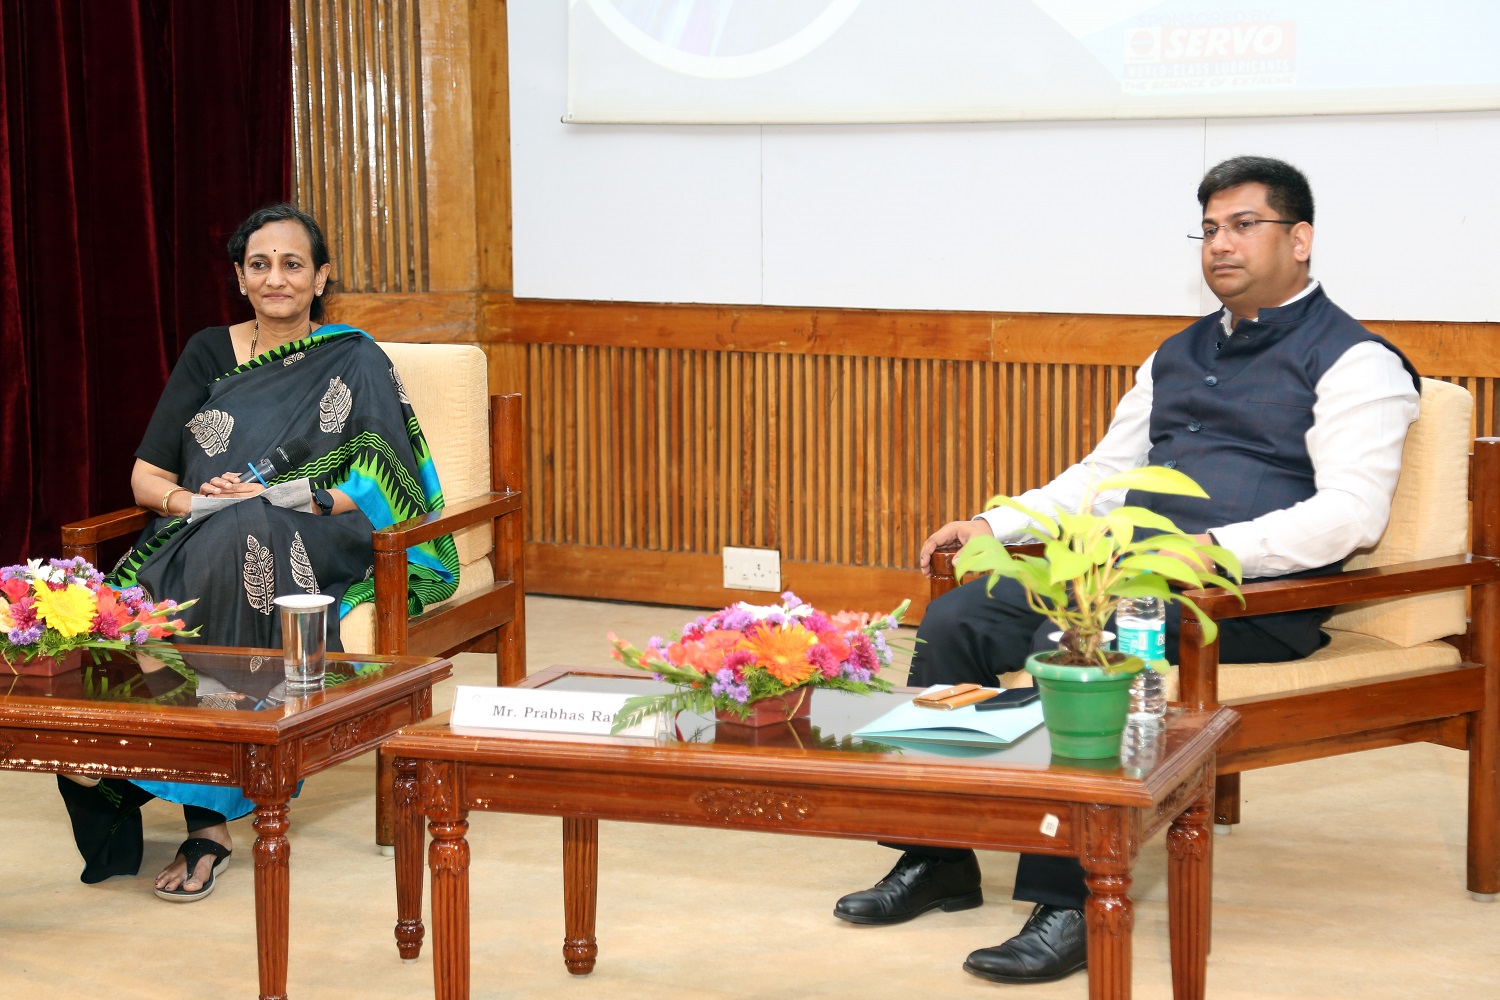 Professor Padmini Srinivasan, Faculty in the Finance & Accounting area at IIMB, and Prabhas Rath, General Manager, SEBI, during the fireside chat on ‘Financial Inclusion’. 